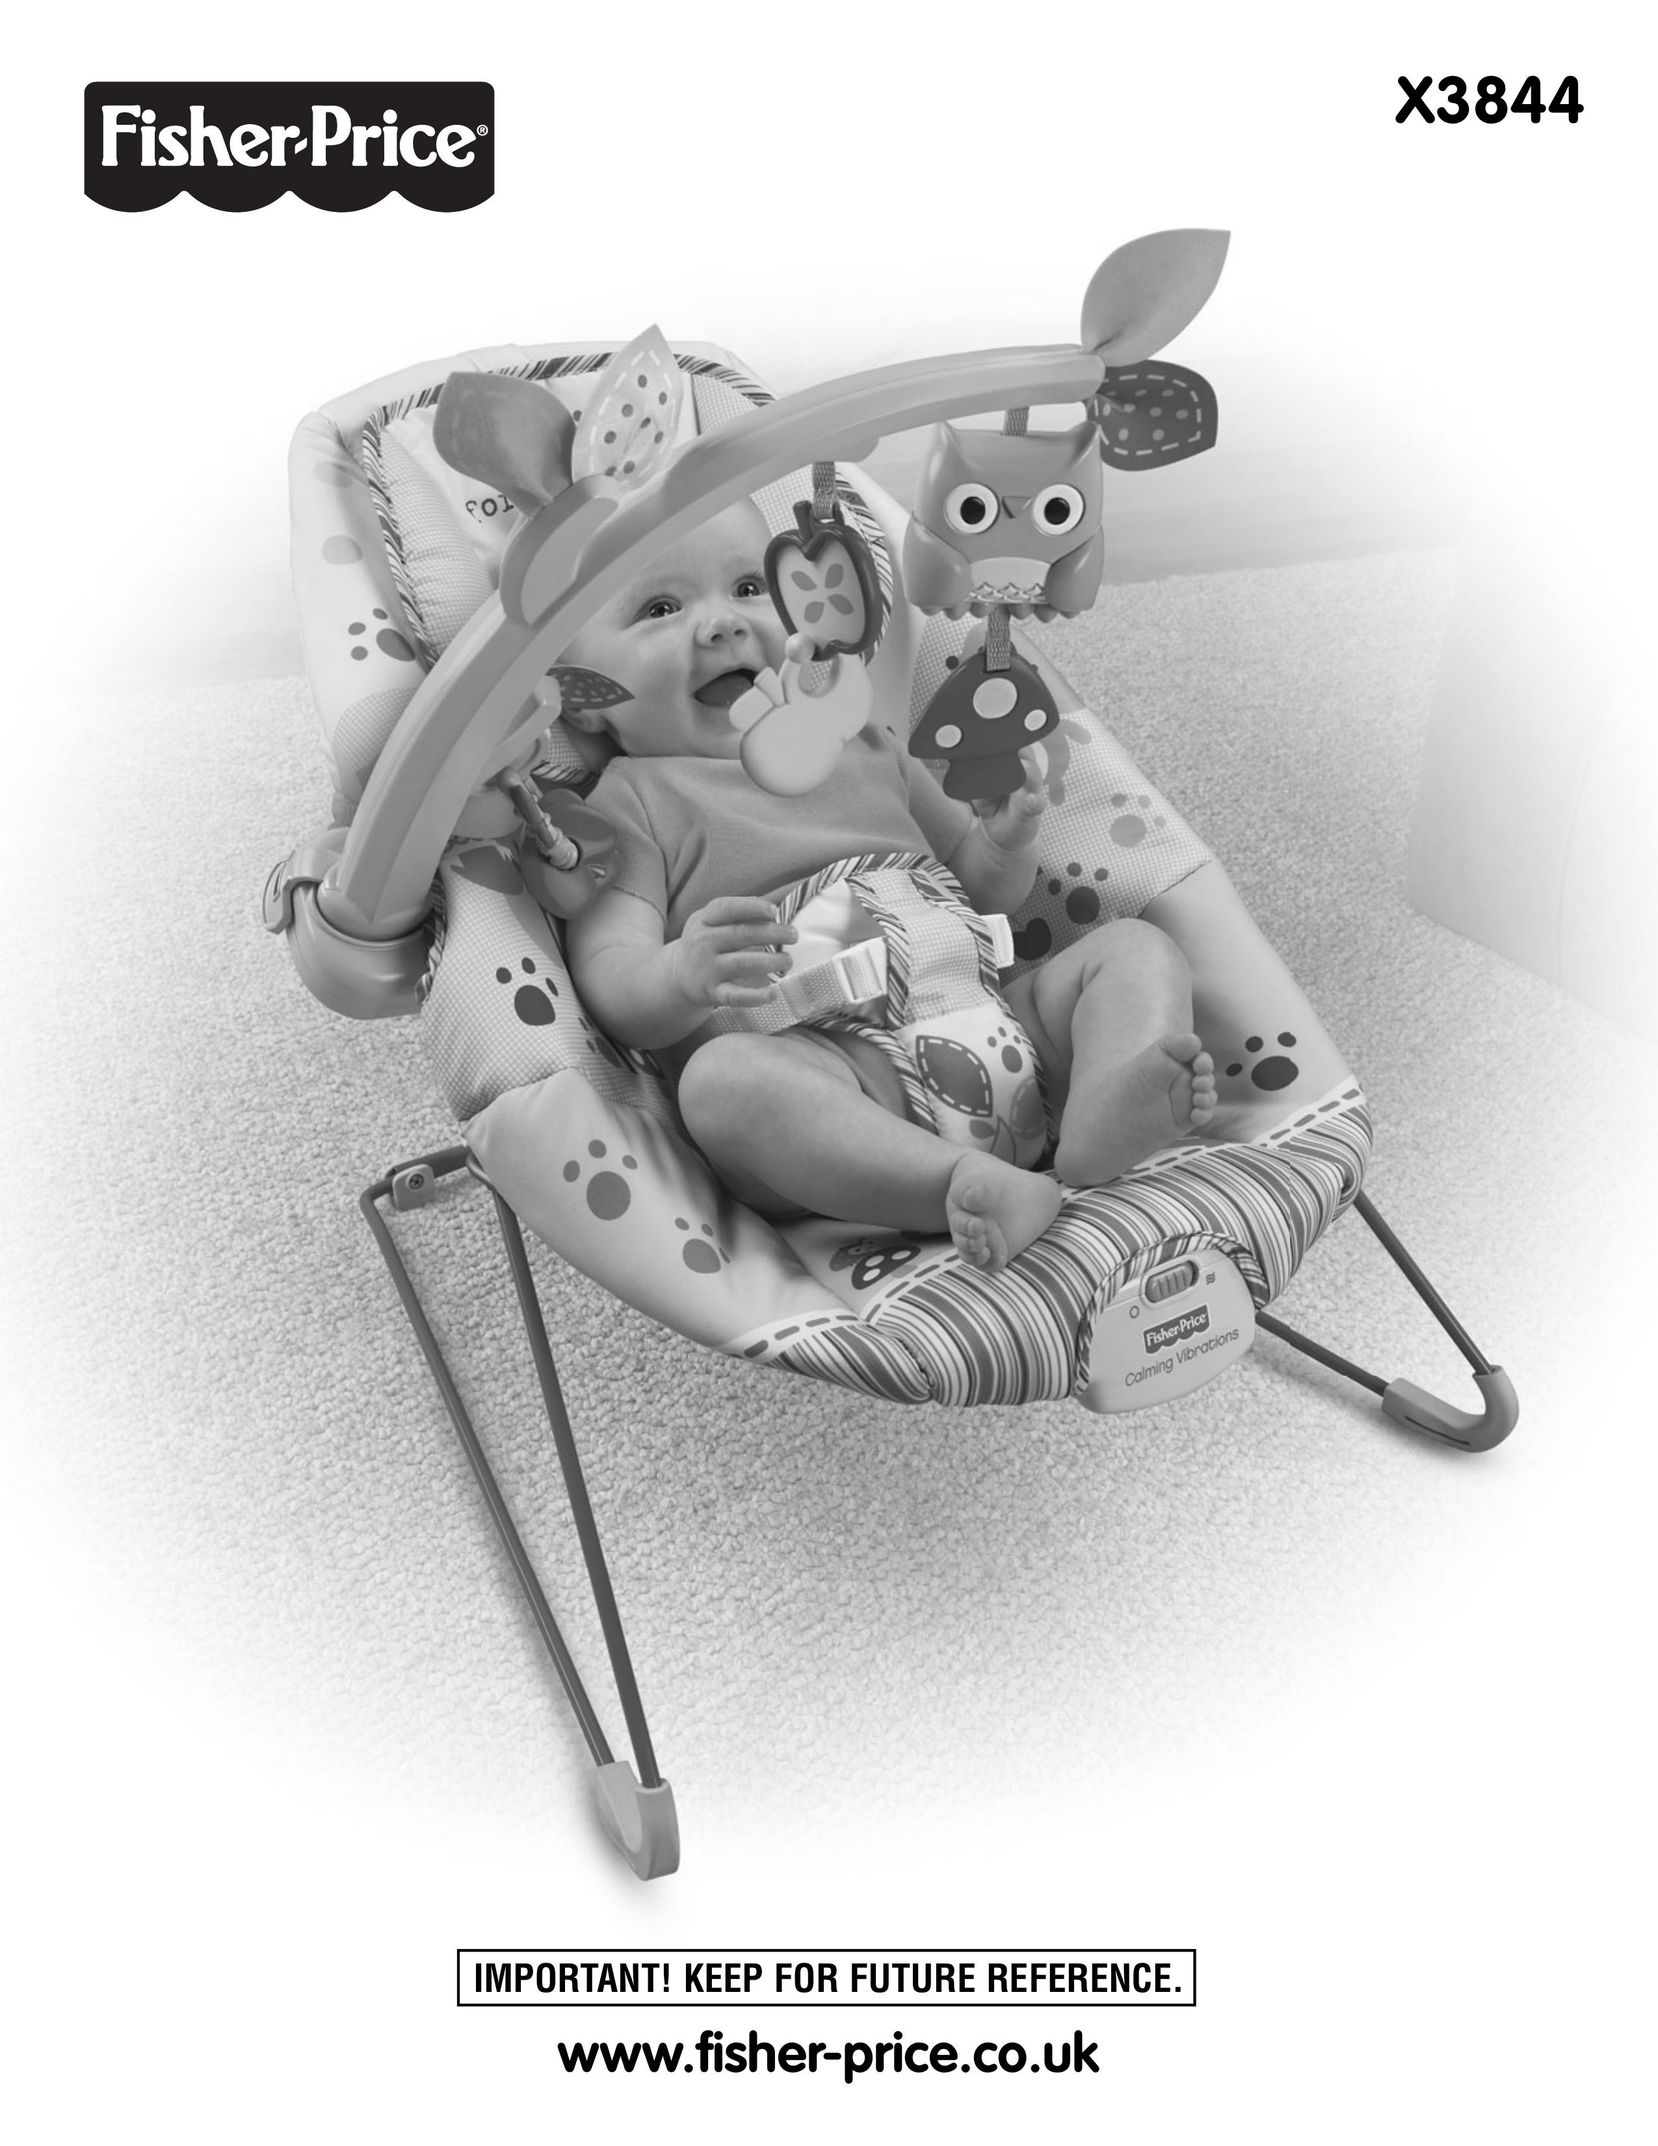 Fisher-Price X3844 Bouncy Seat User Manual